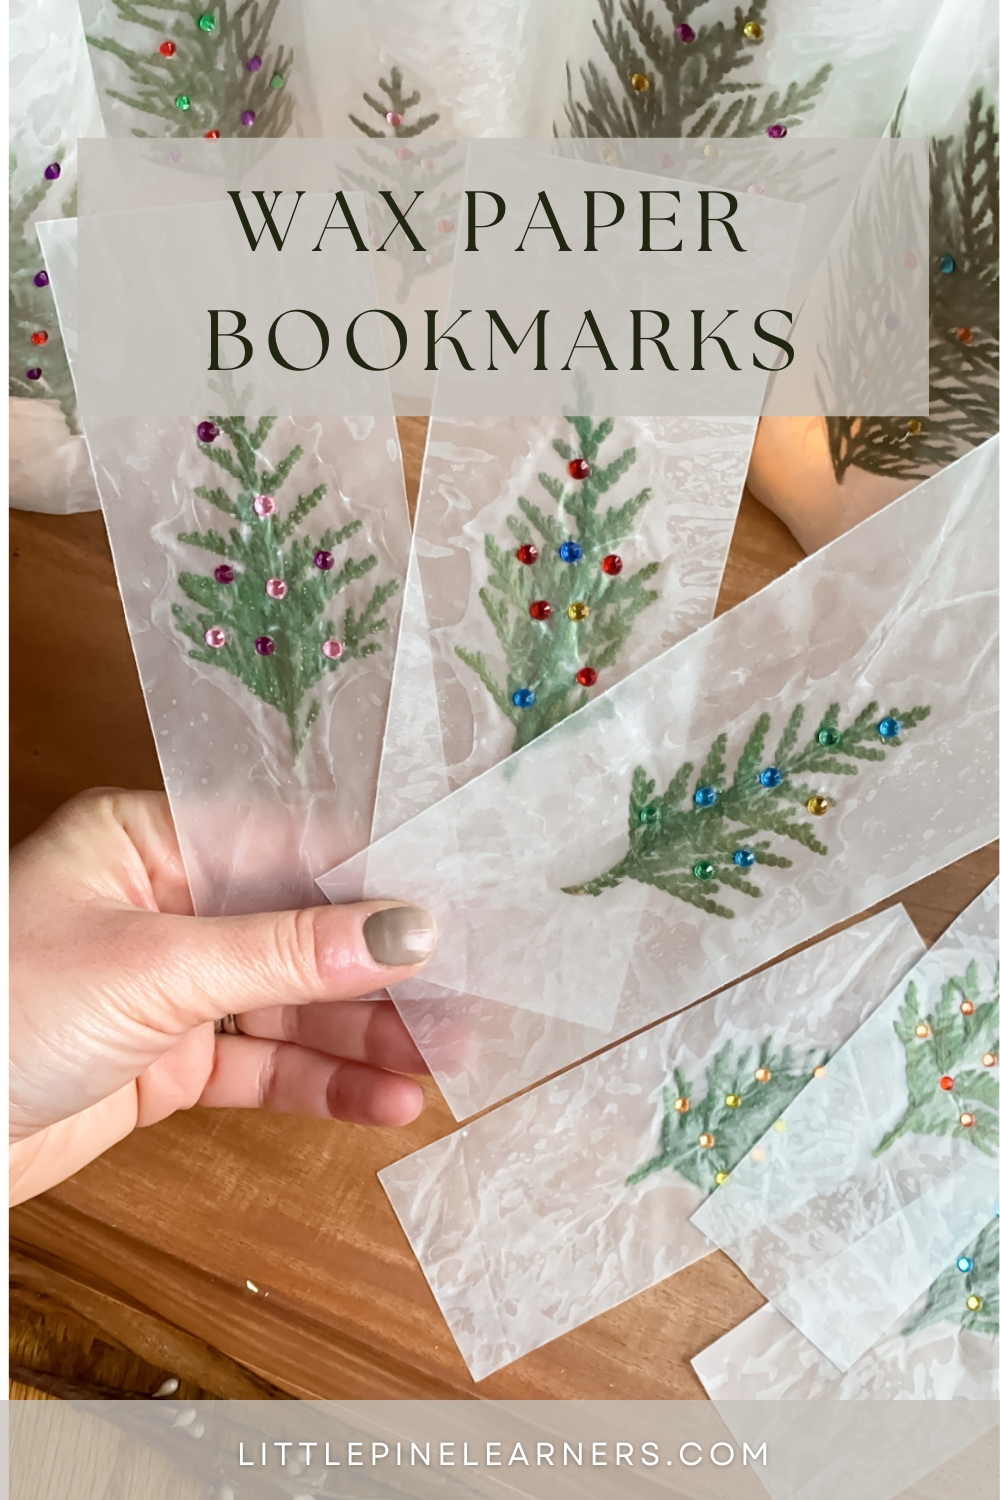 Make your own bookmark with wax paper!